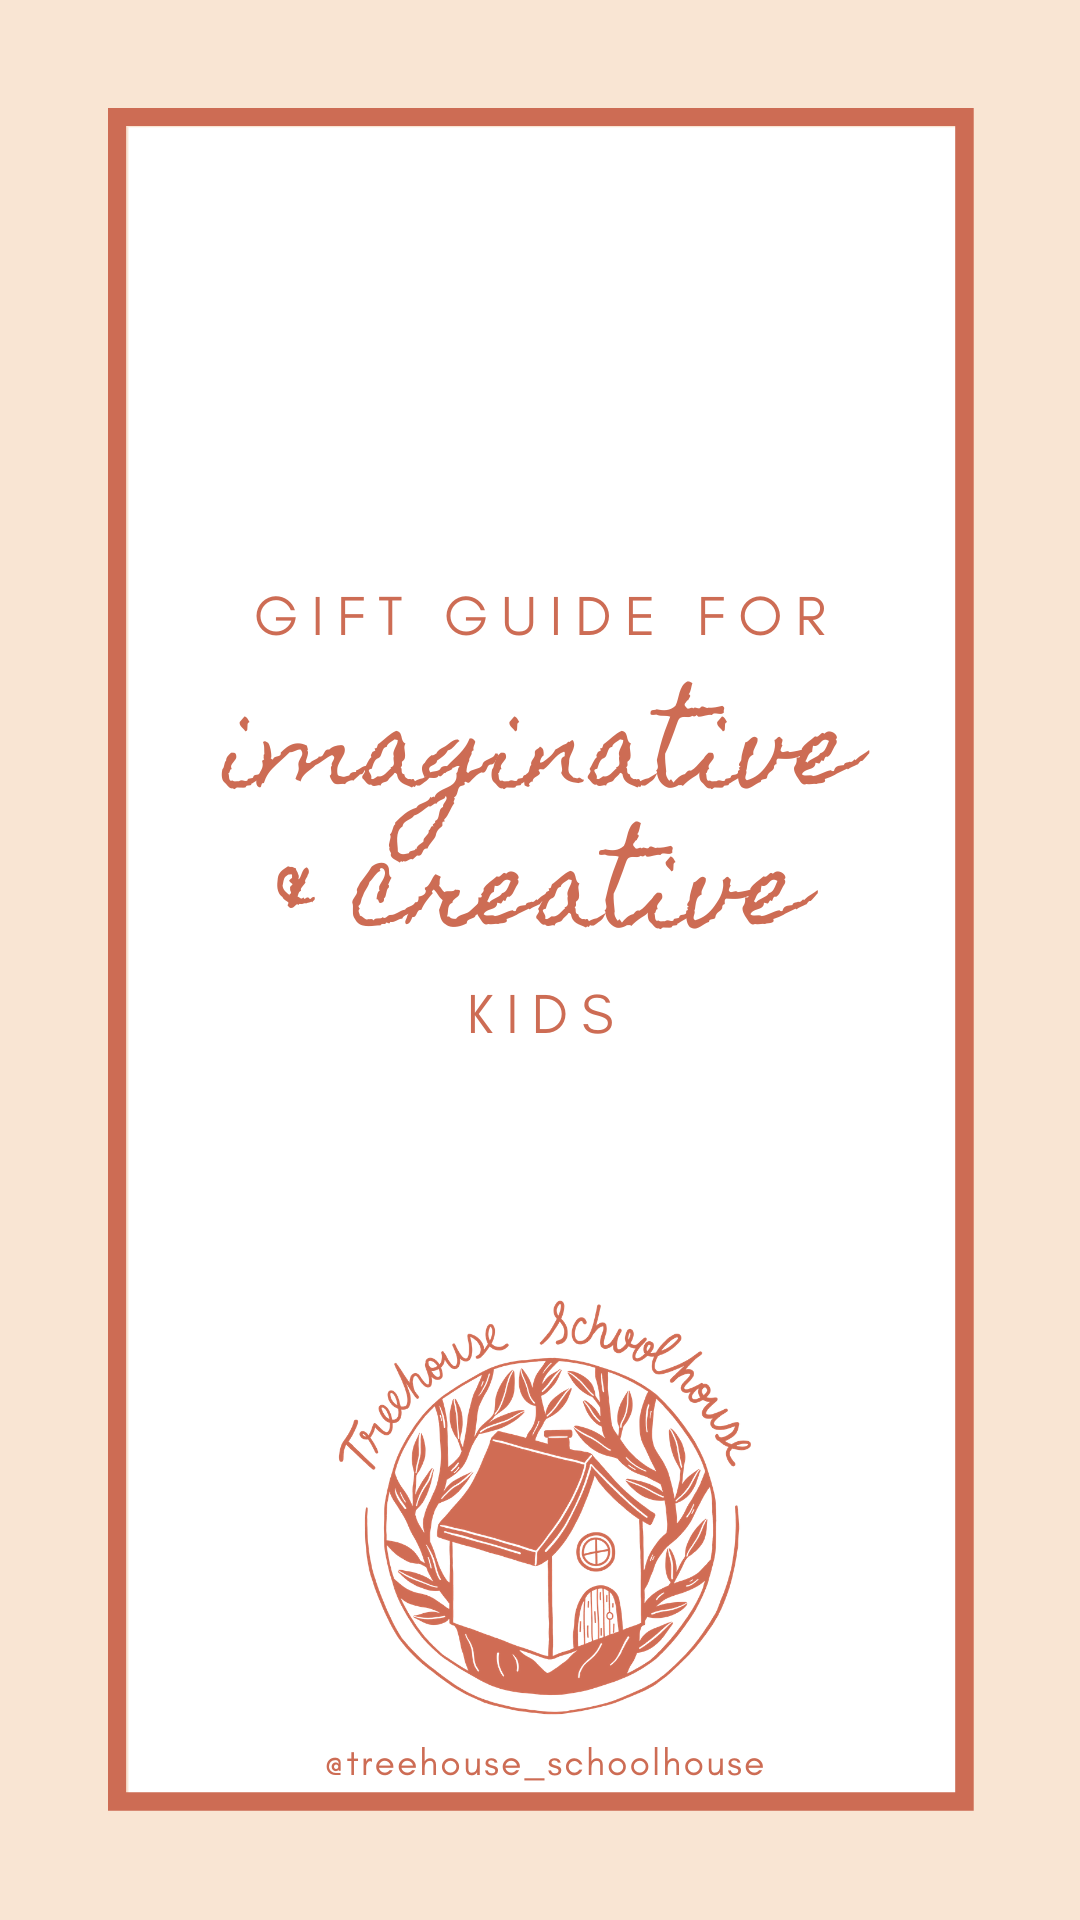 Gift Guide for Imaginative Creative Kids